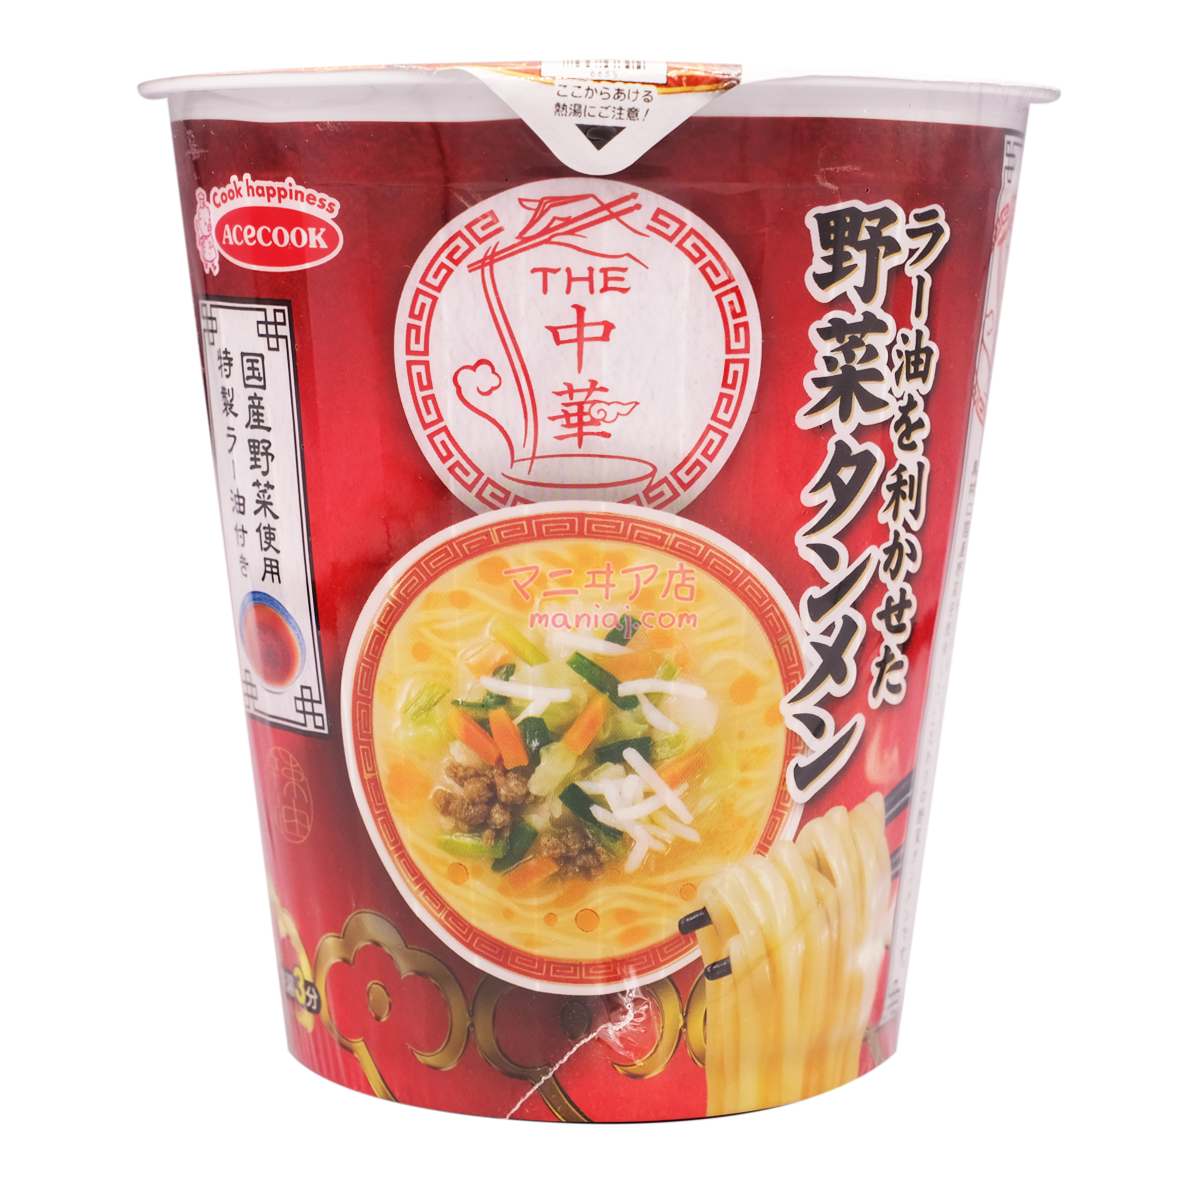 THE CHINESE CHILLI OIL VEGETABLE Noodle Soup